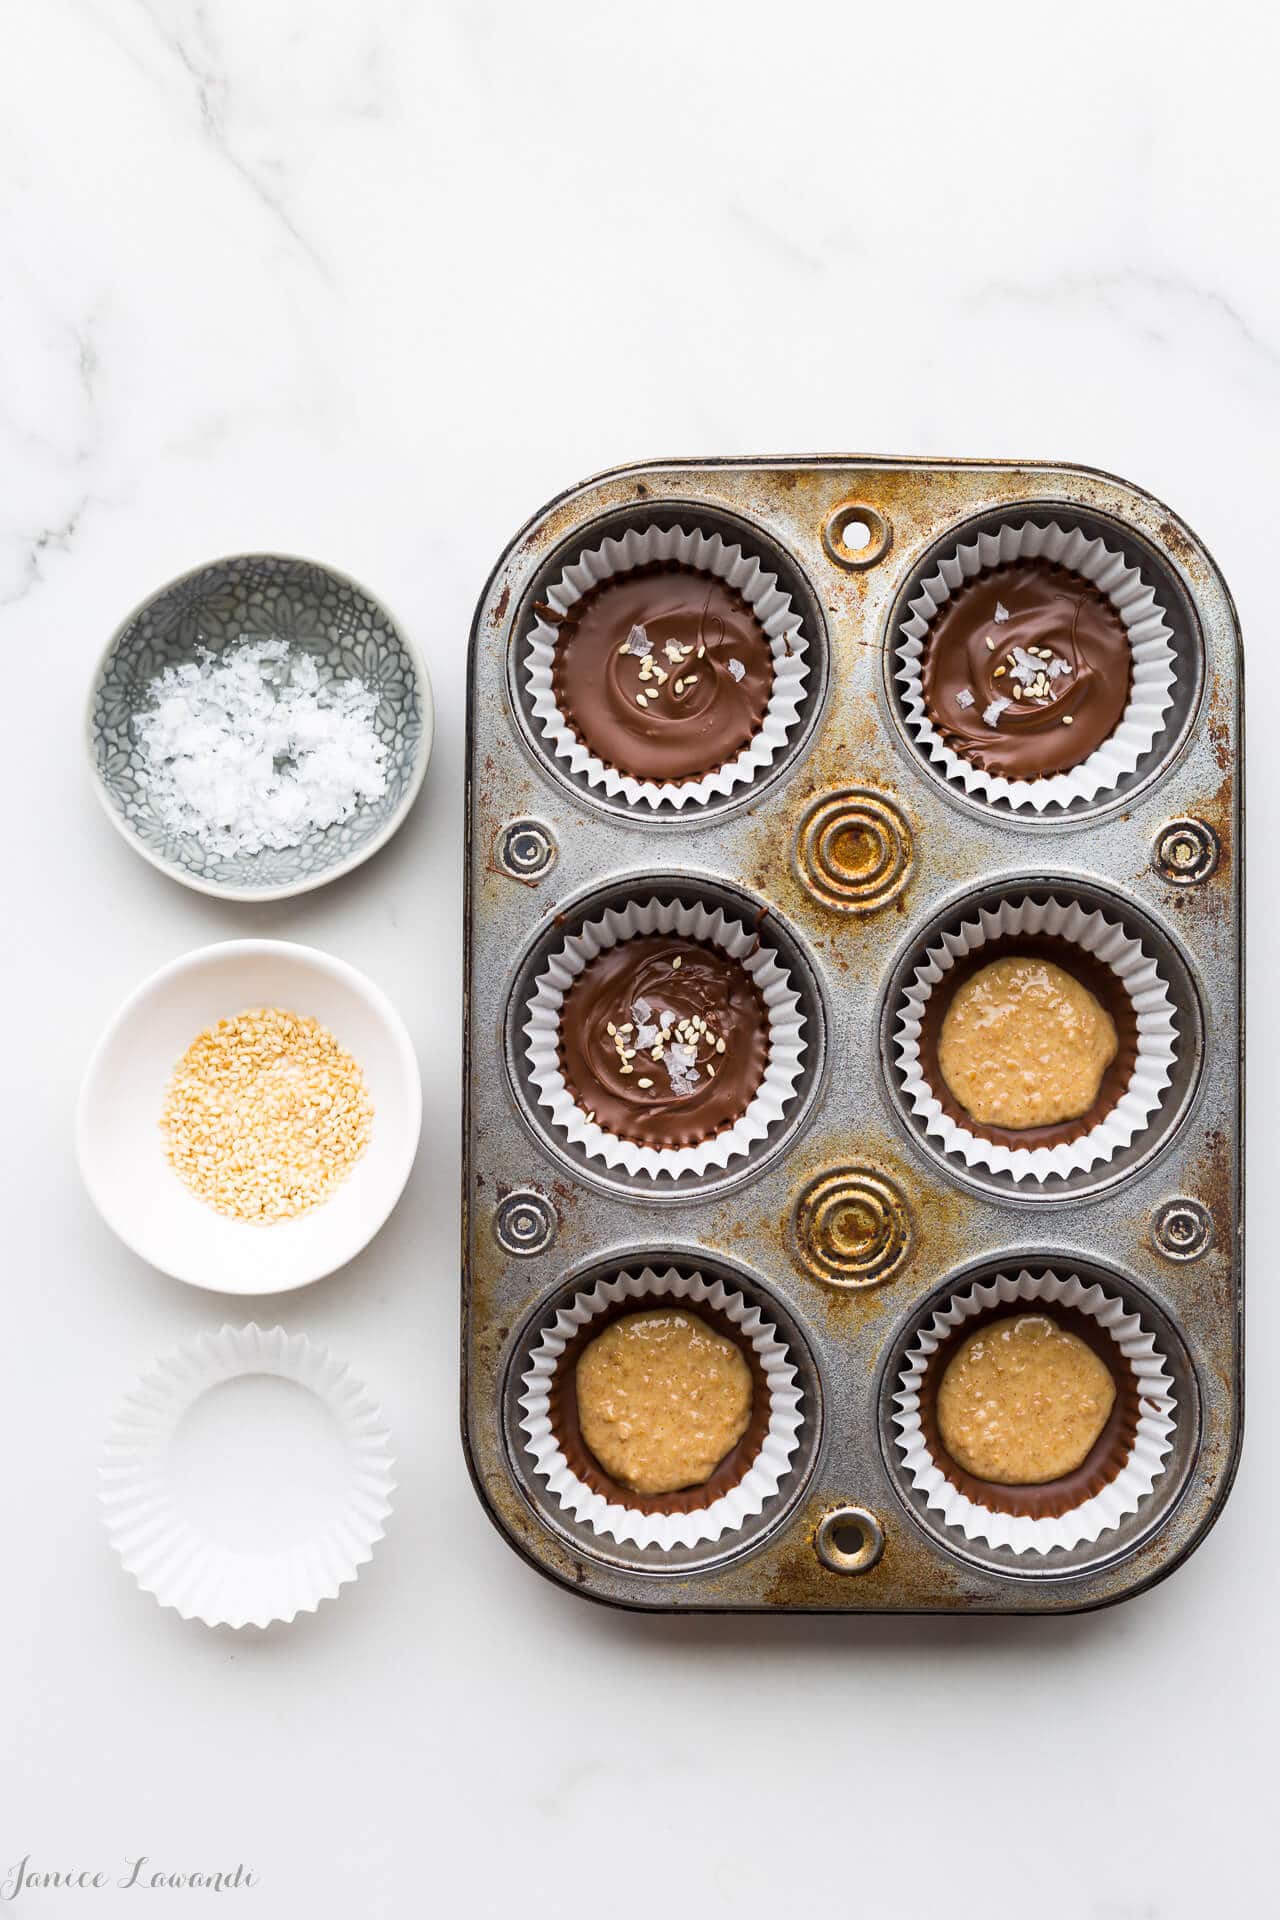 How to make chocolate peanut butter cups with any nut butter